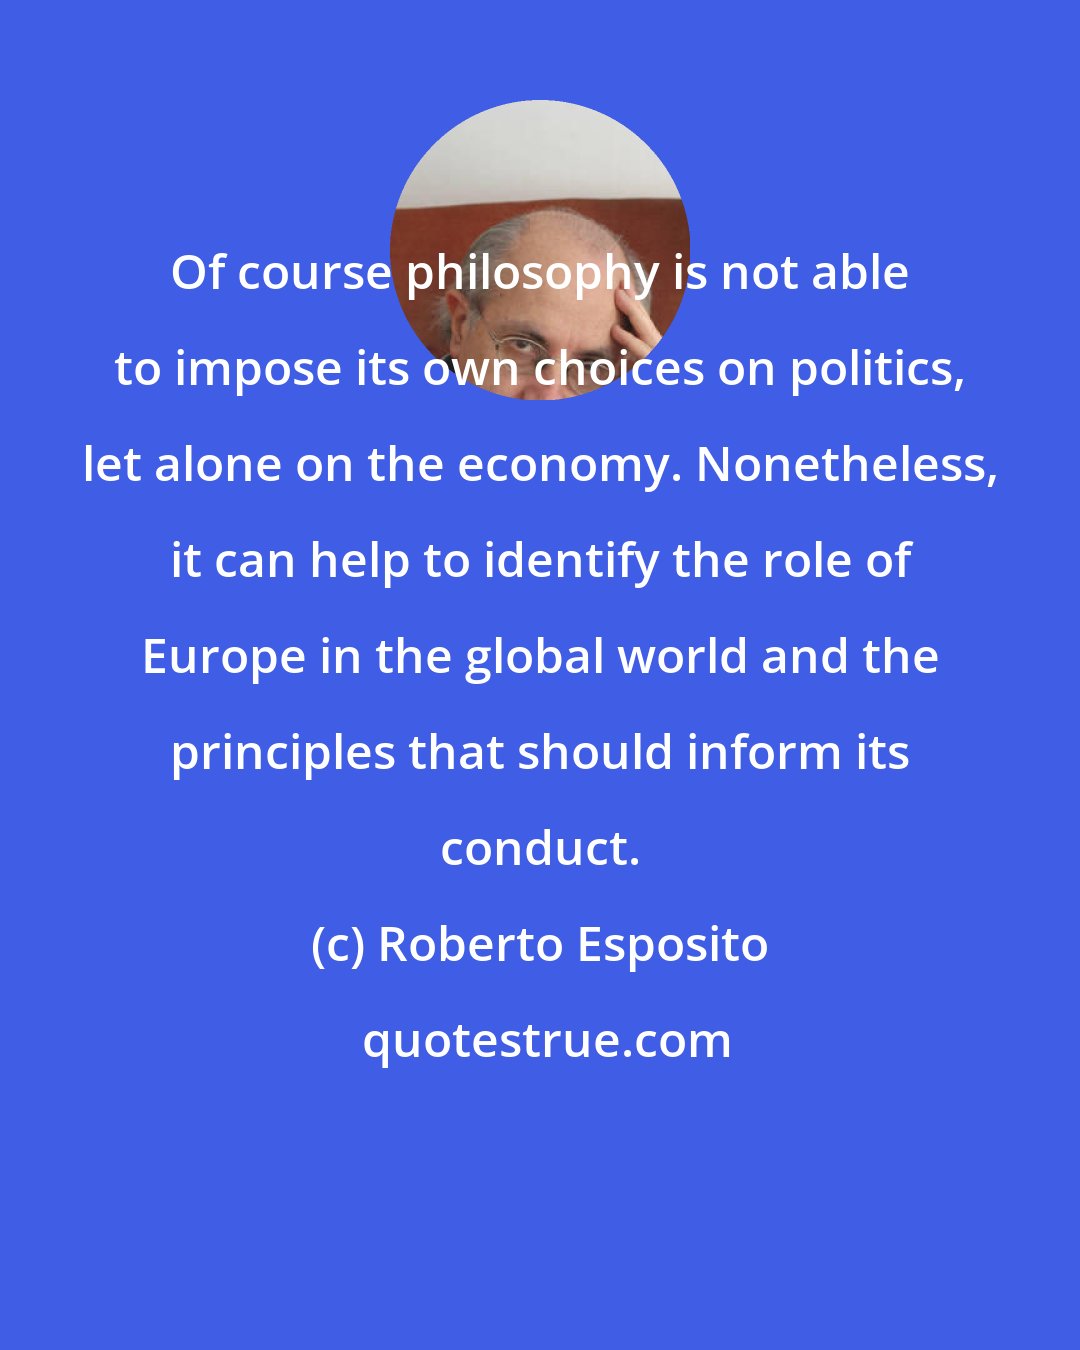 Roberto Esposito: Of course philosophy is not able to impose its own choices on politics, let alone on the economy. Nonetheless, it can help to identify the role of Europe in the global world and the principles that should inform its conduct.